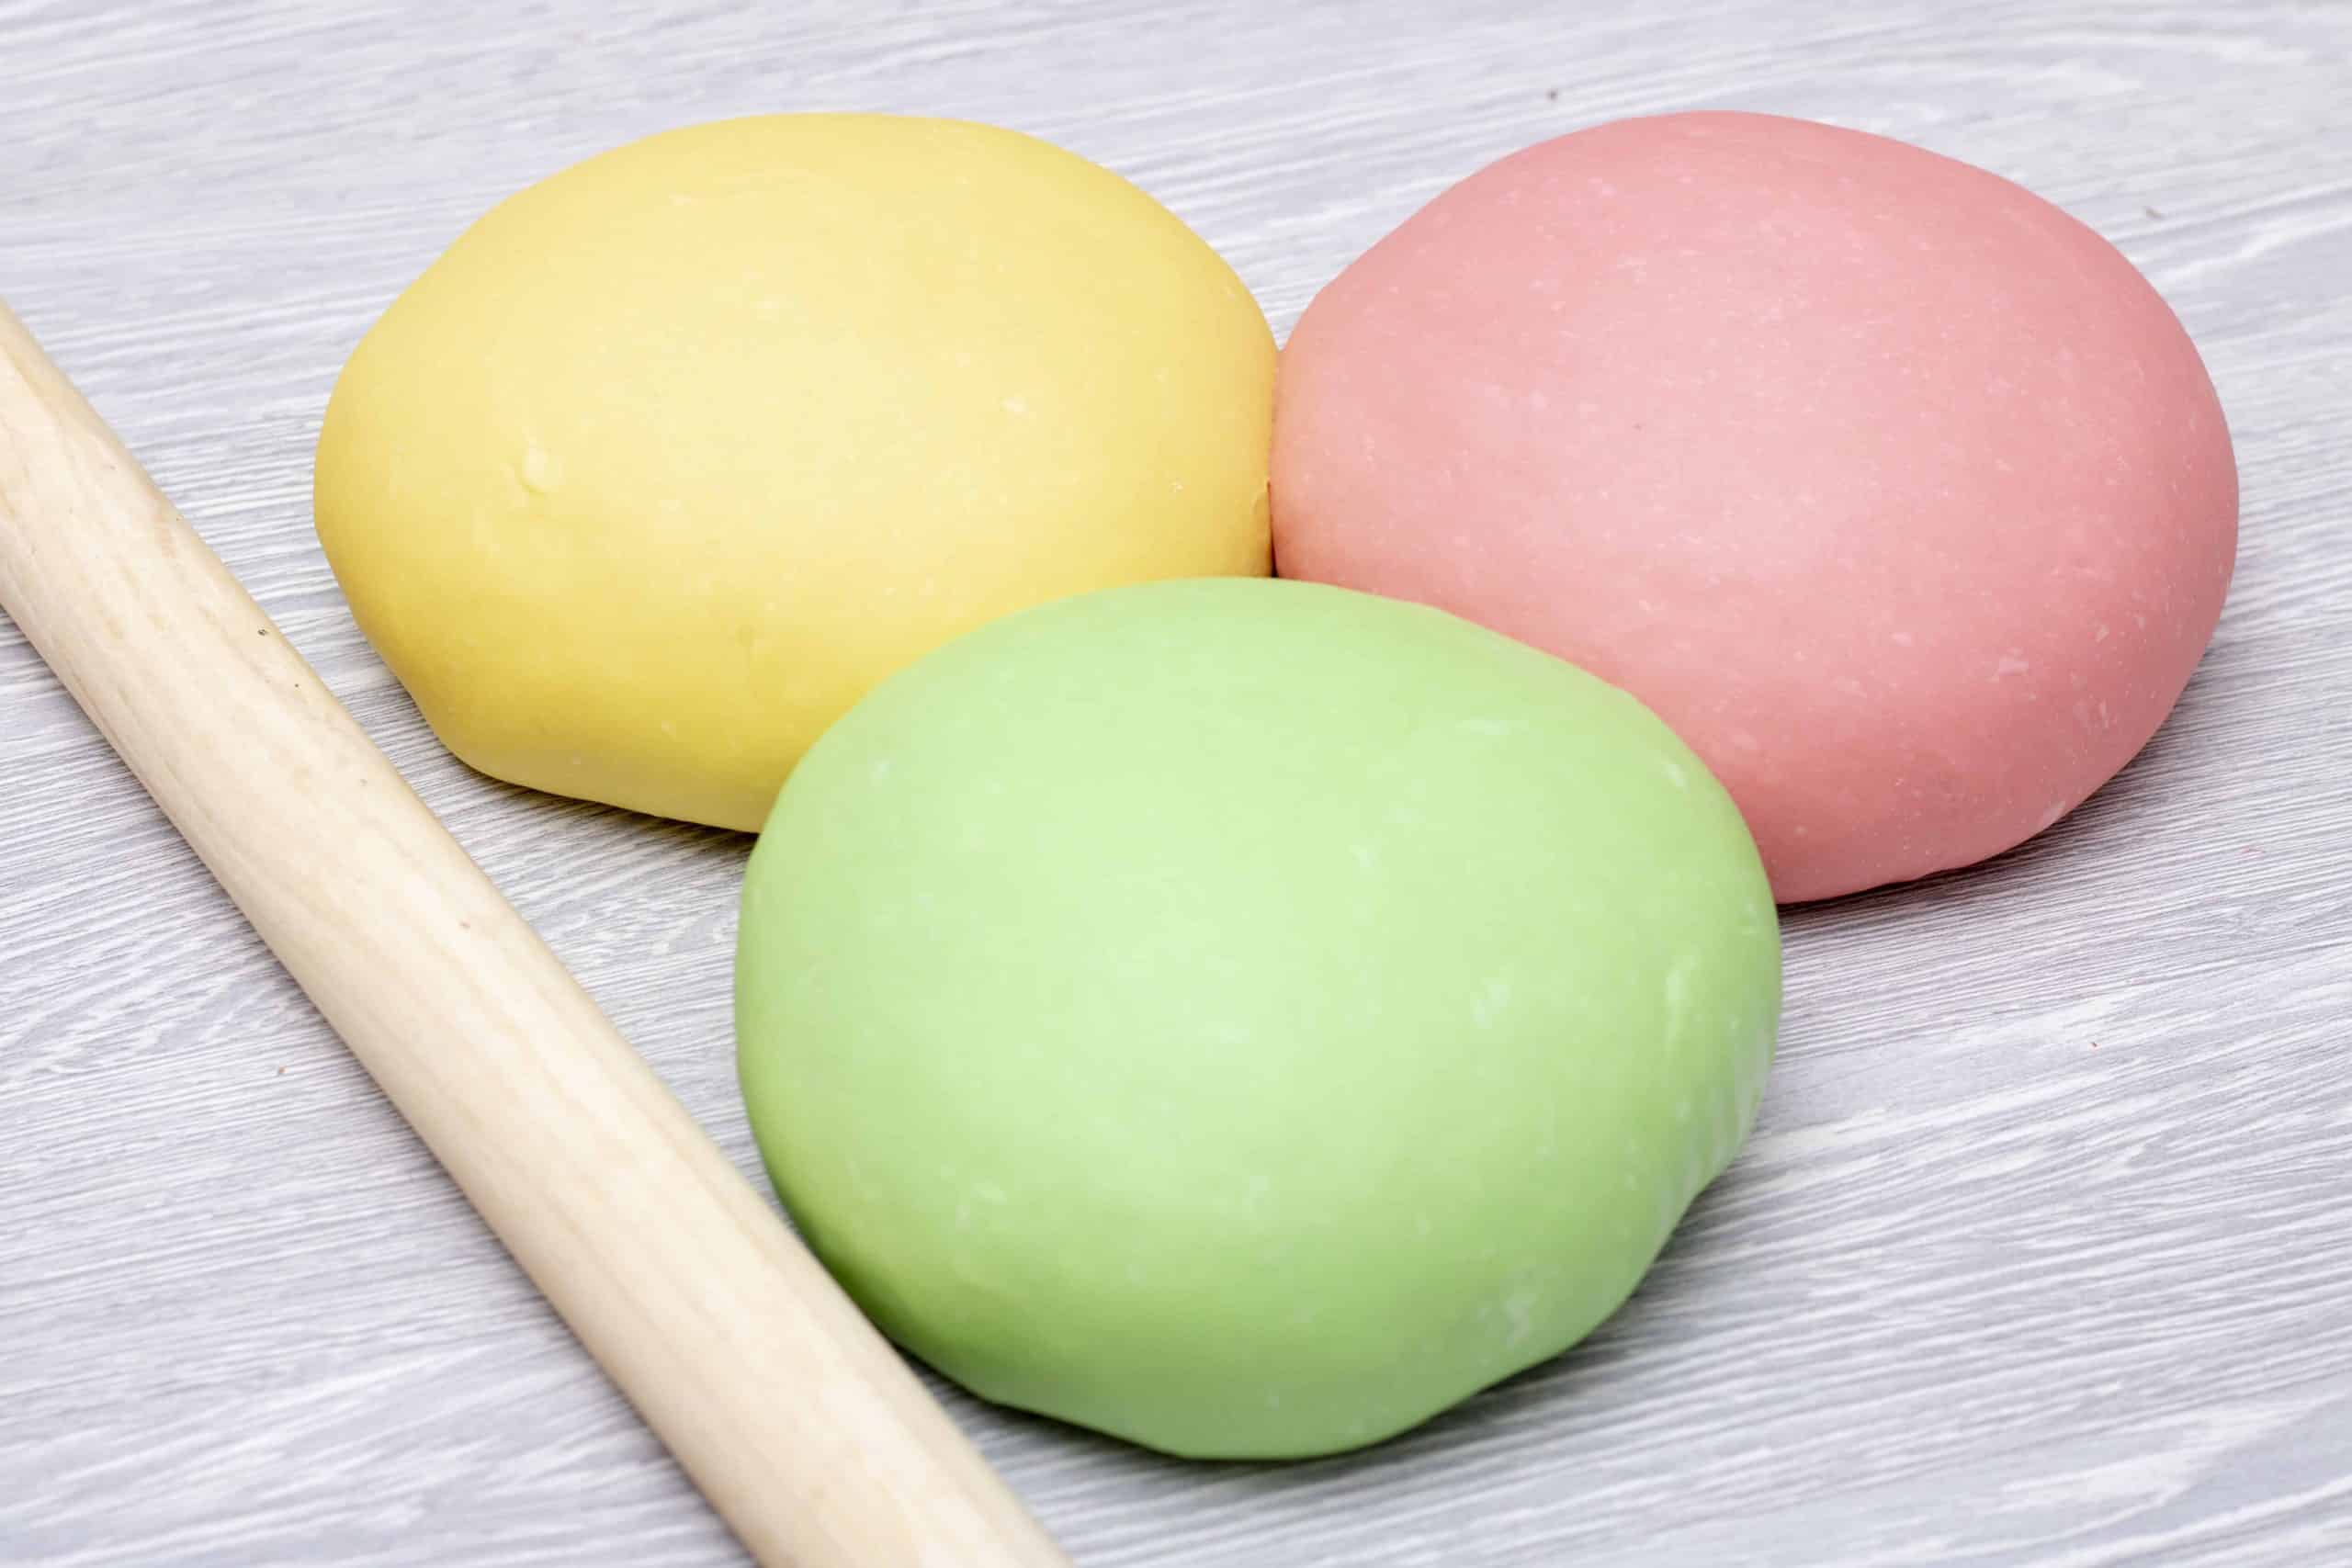 This homemade, non-toxic play-dough is the best thing ever!